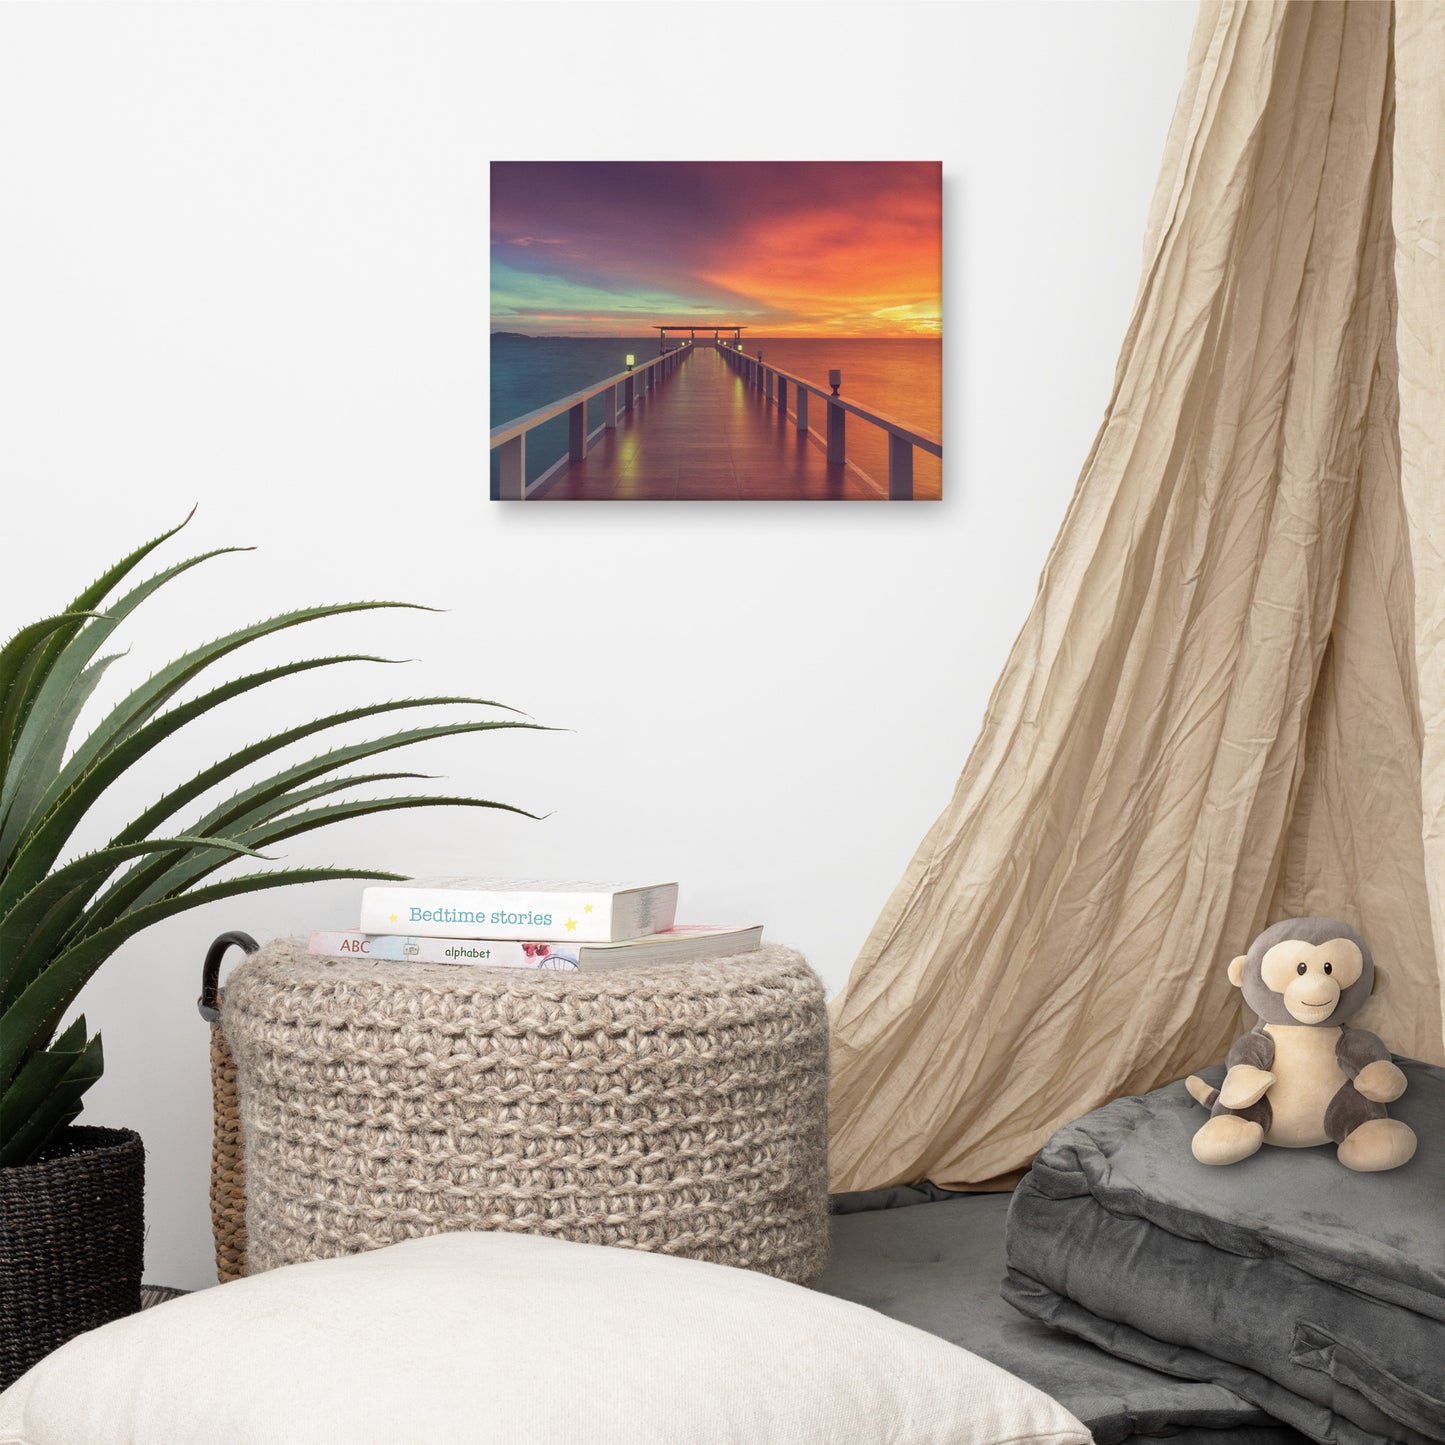 Wall Scenery For Bedroom: Surreal Wooden Pier At Sunset with Intrigued Effect Landscape Photo Canvas Wall Art Prints